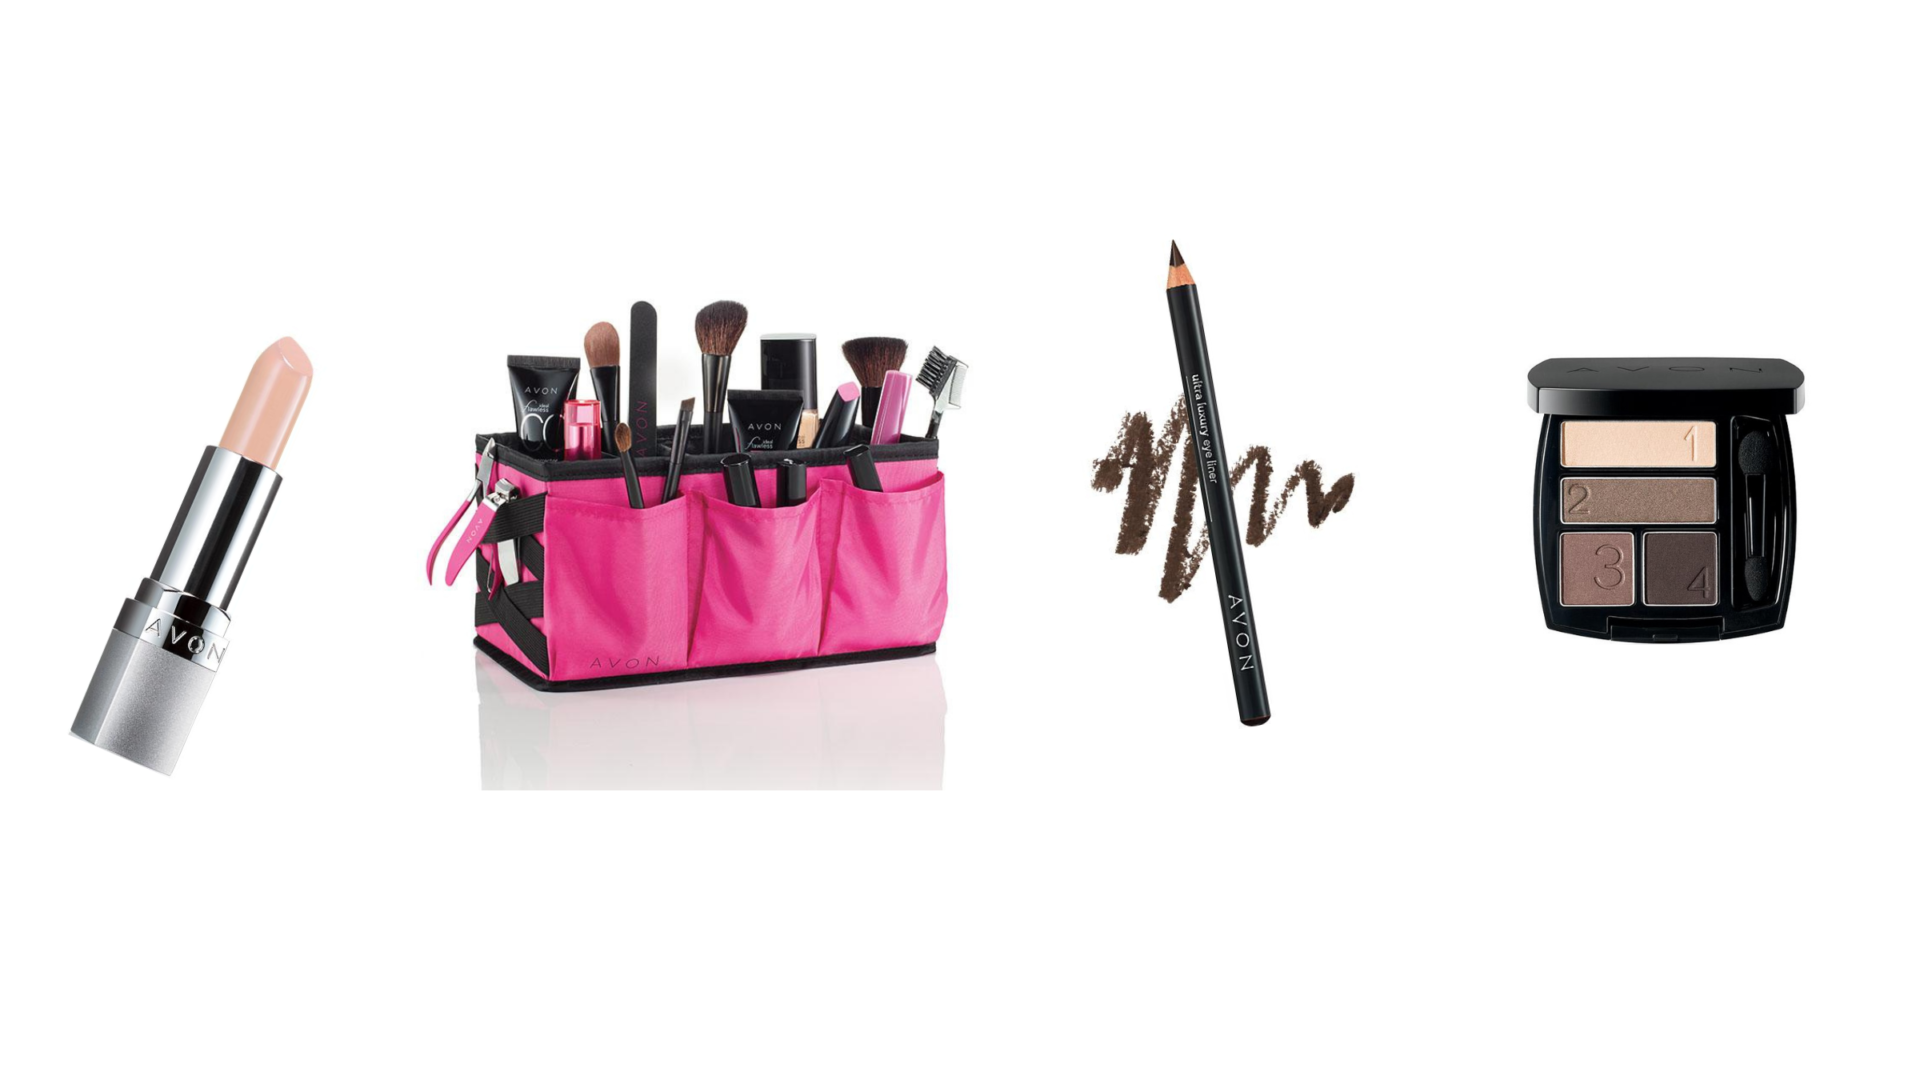 avon makeup products being discontinued